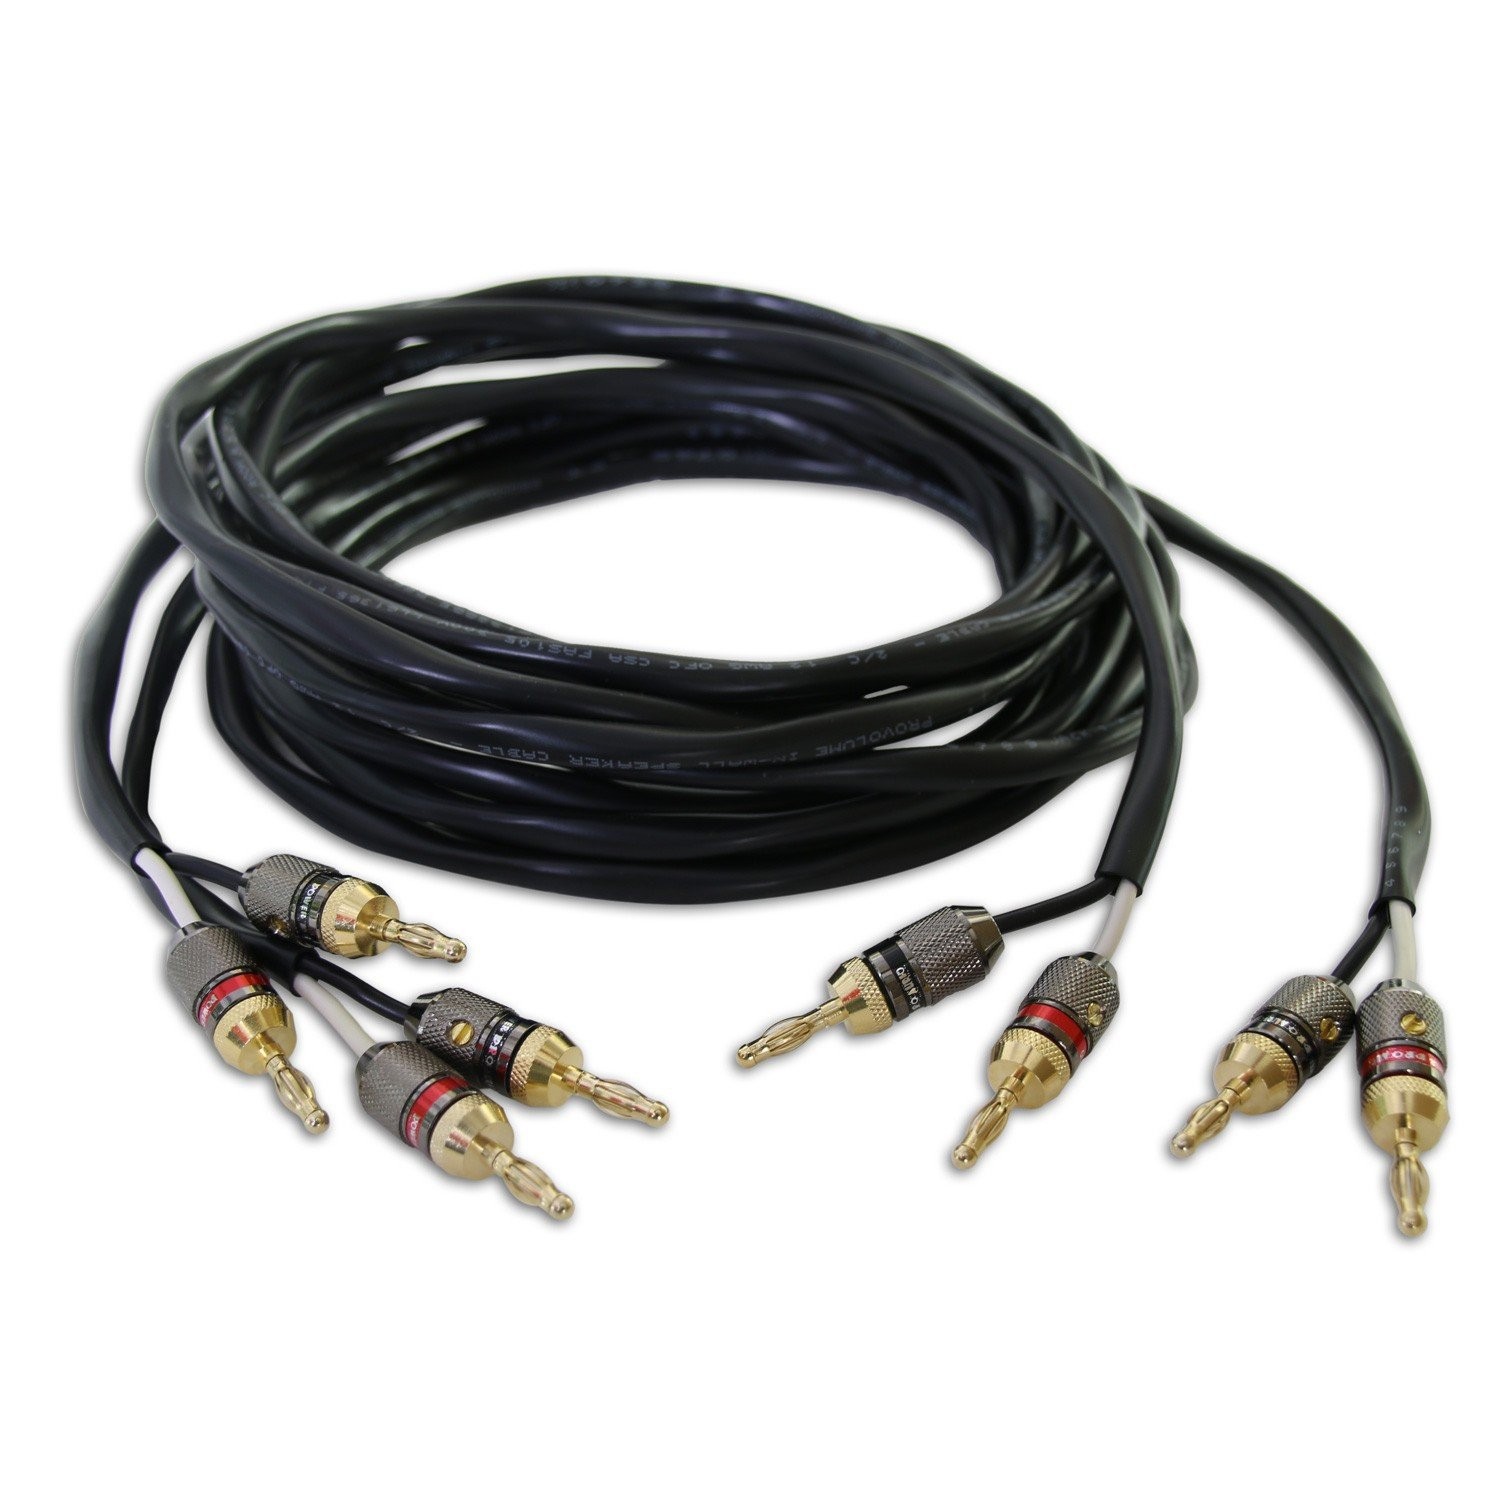 ThruSound HiFi-Series 12AWG 2-Conductor Speaker Wire with Premium 24k Gold-Plated Banana Plugs (25 Feet/Pair)